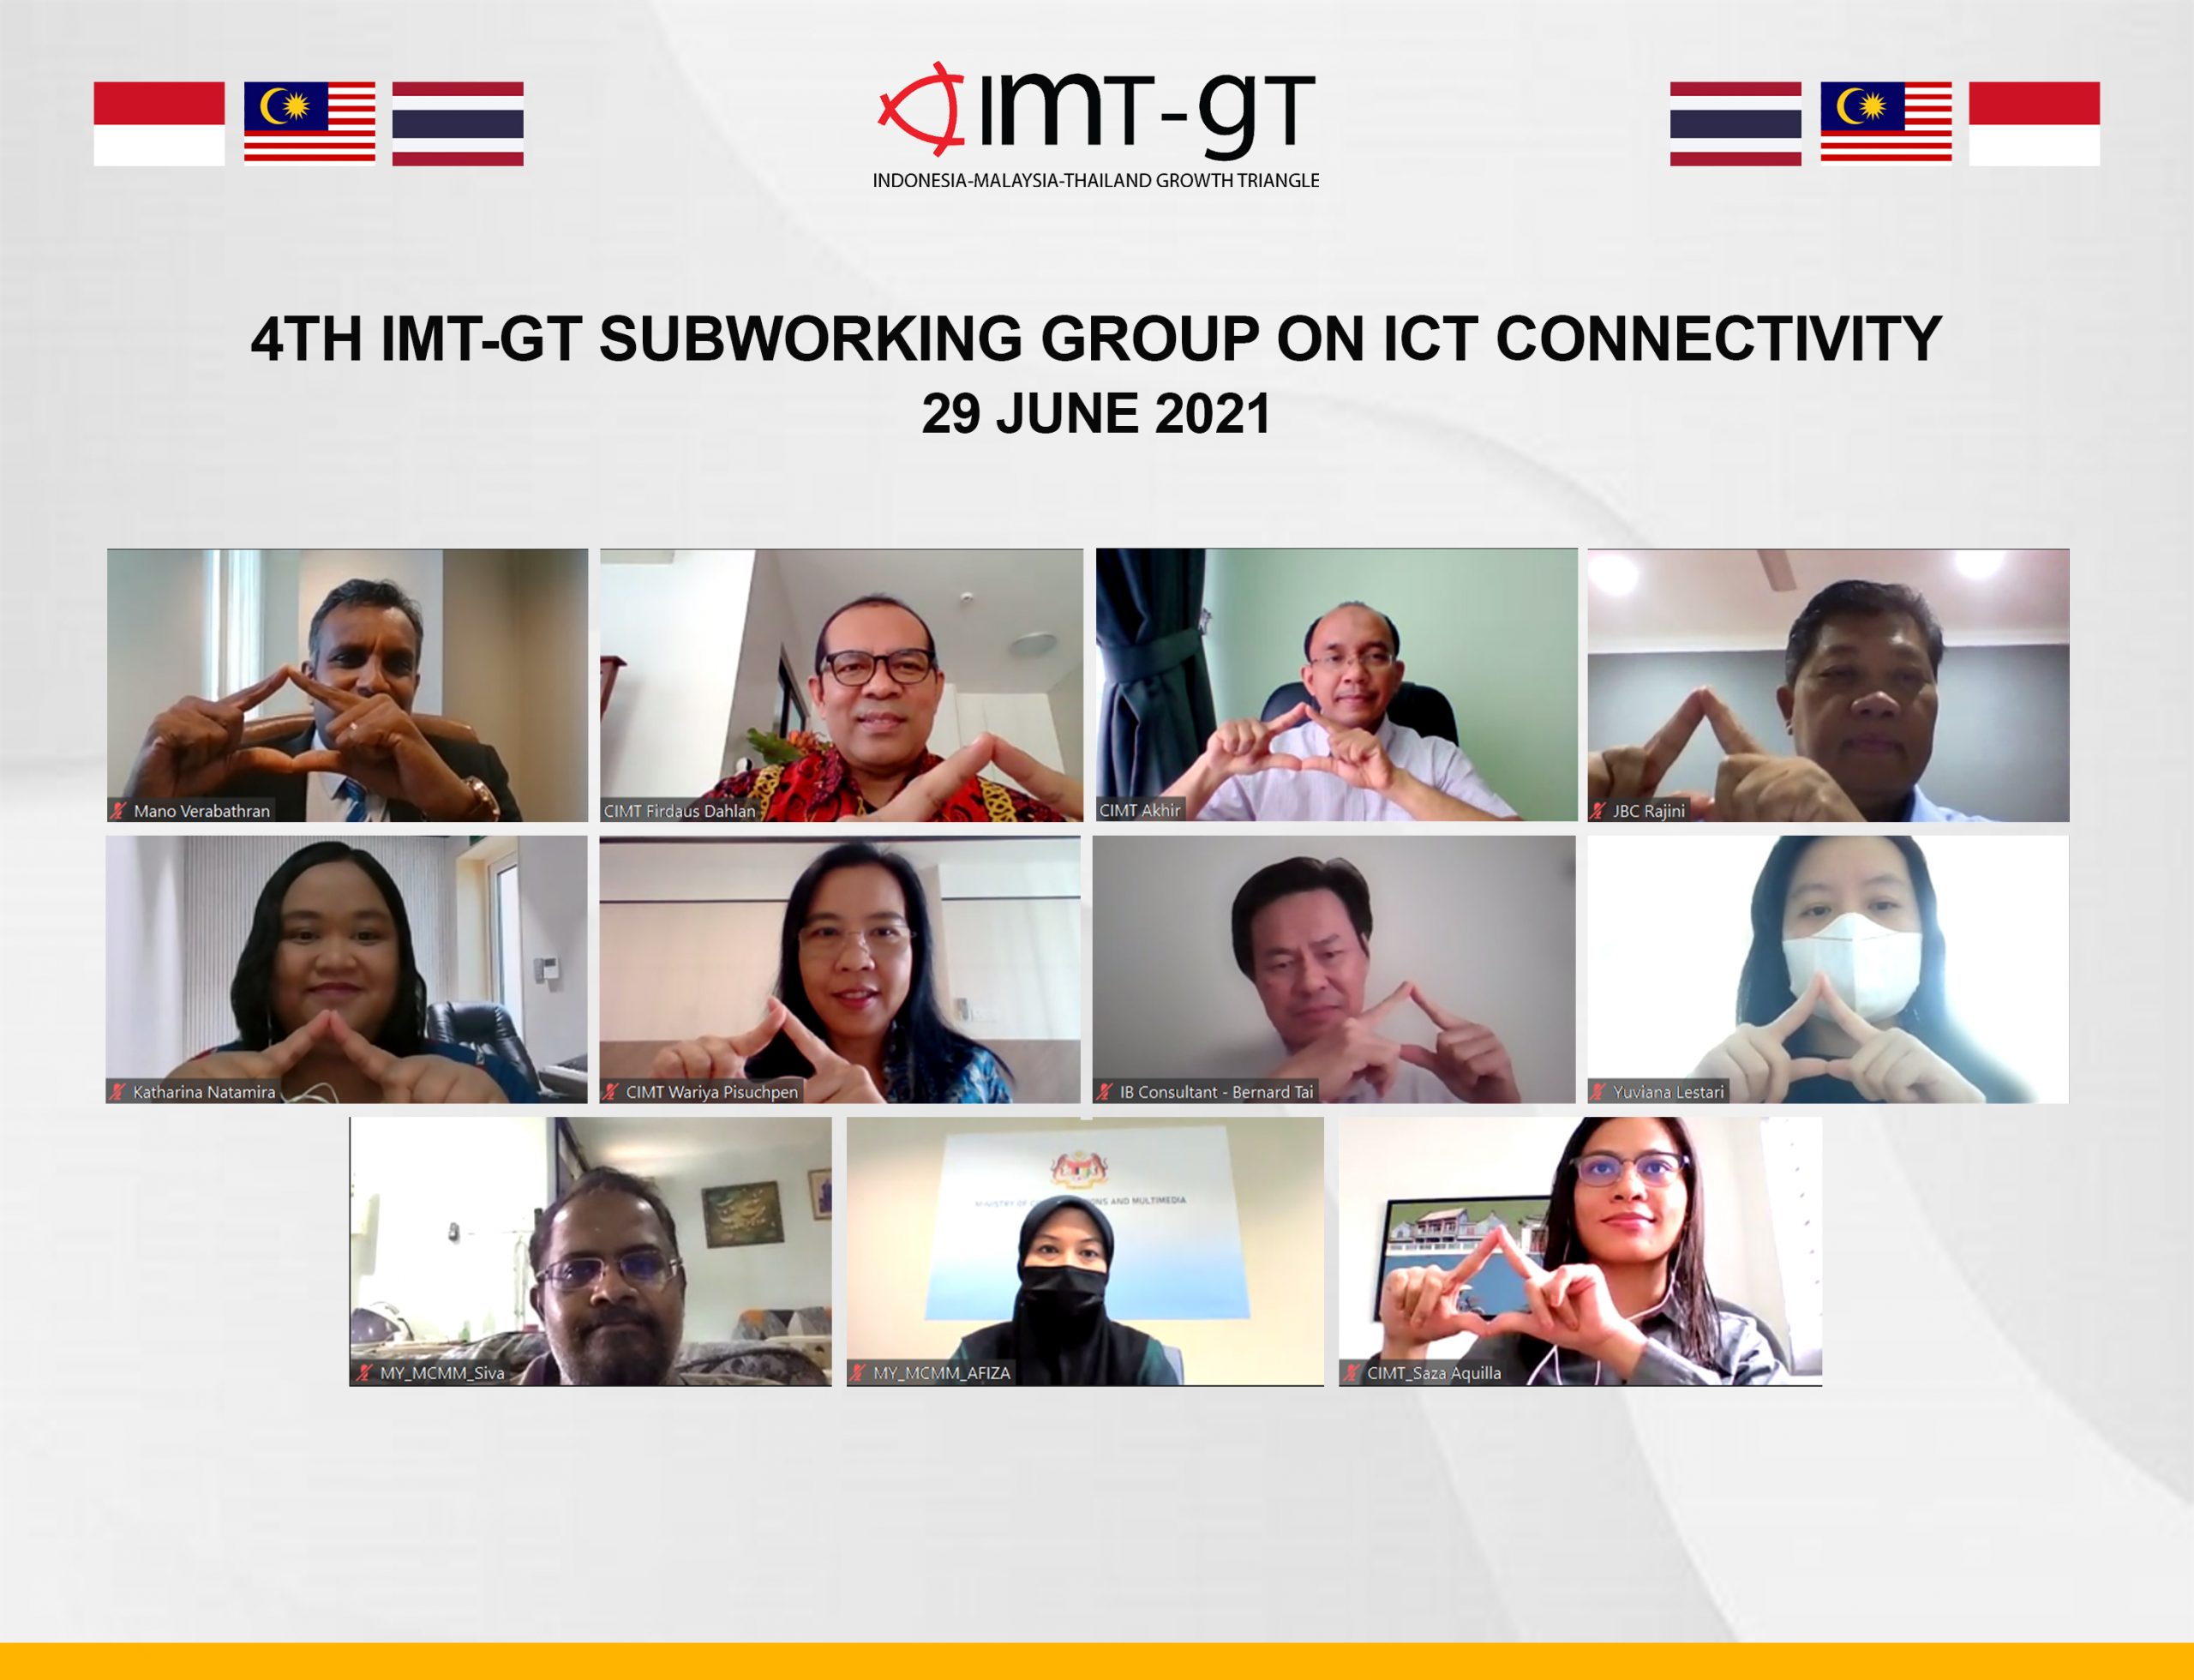 4TH IMT-GT Subworking Group Meeting on ICT Connectivity